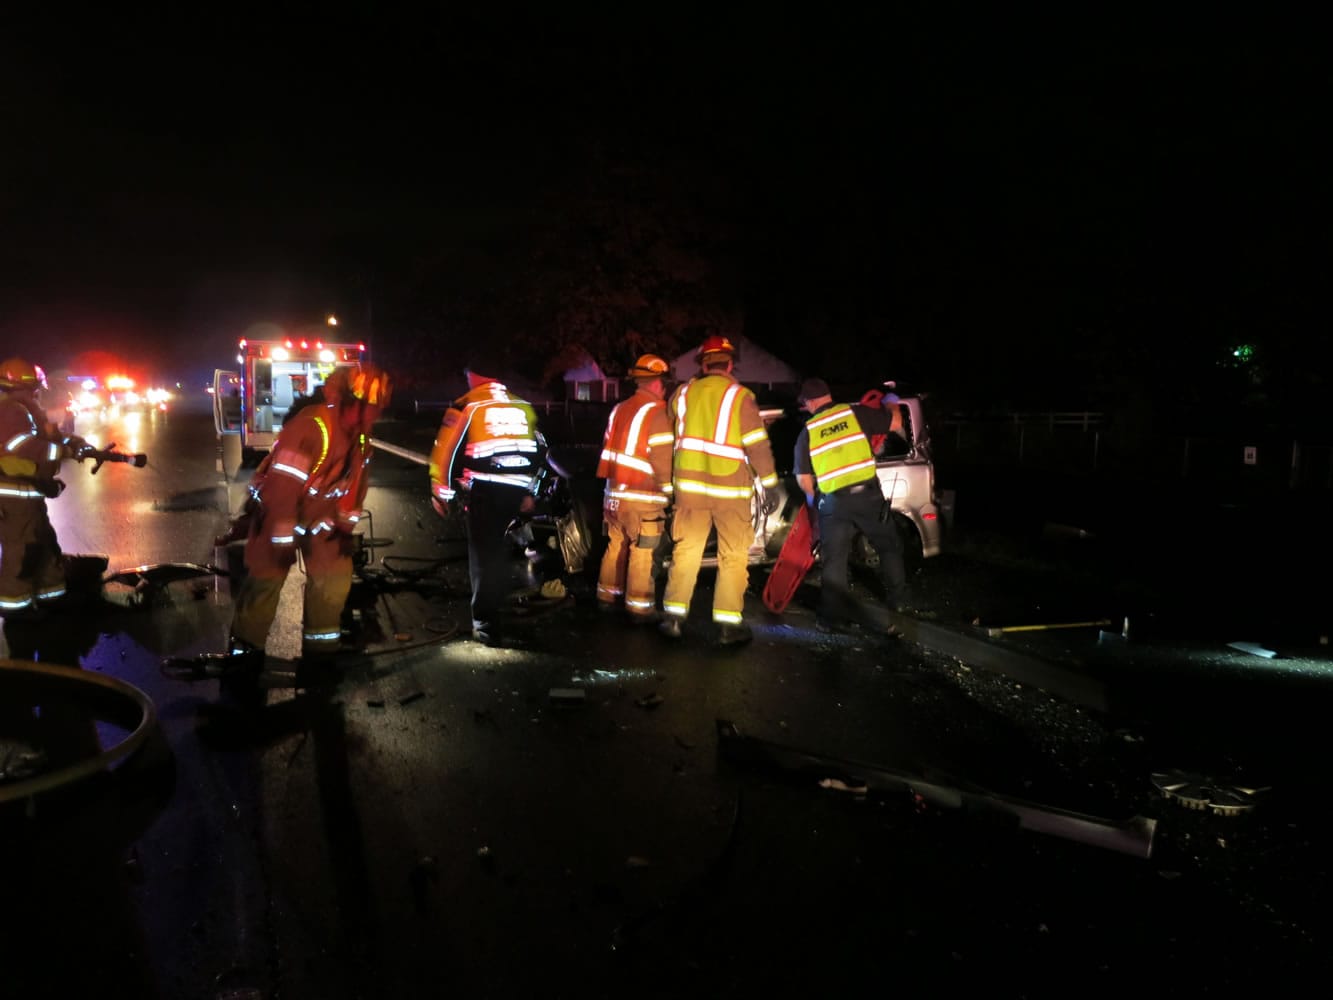 Clark County Fire District 3 extricated one person from a three-vehicle crash late Sunday night.